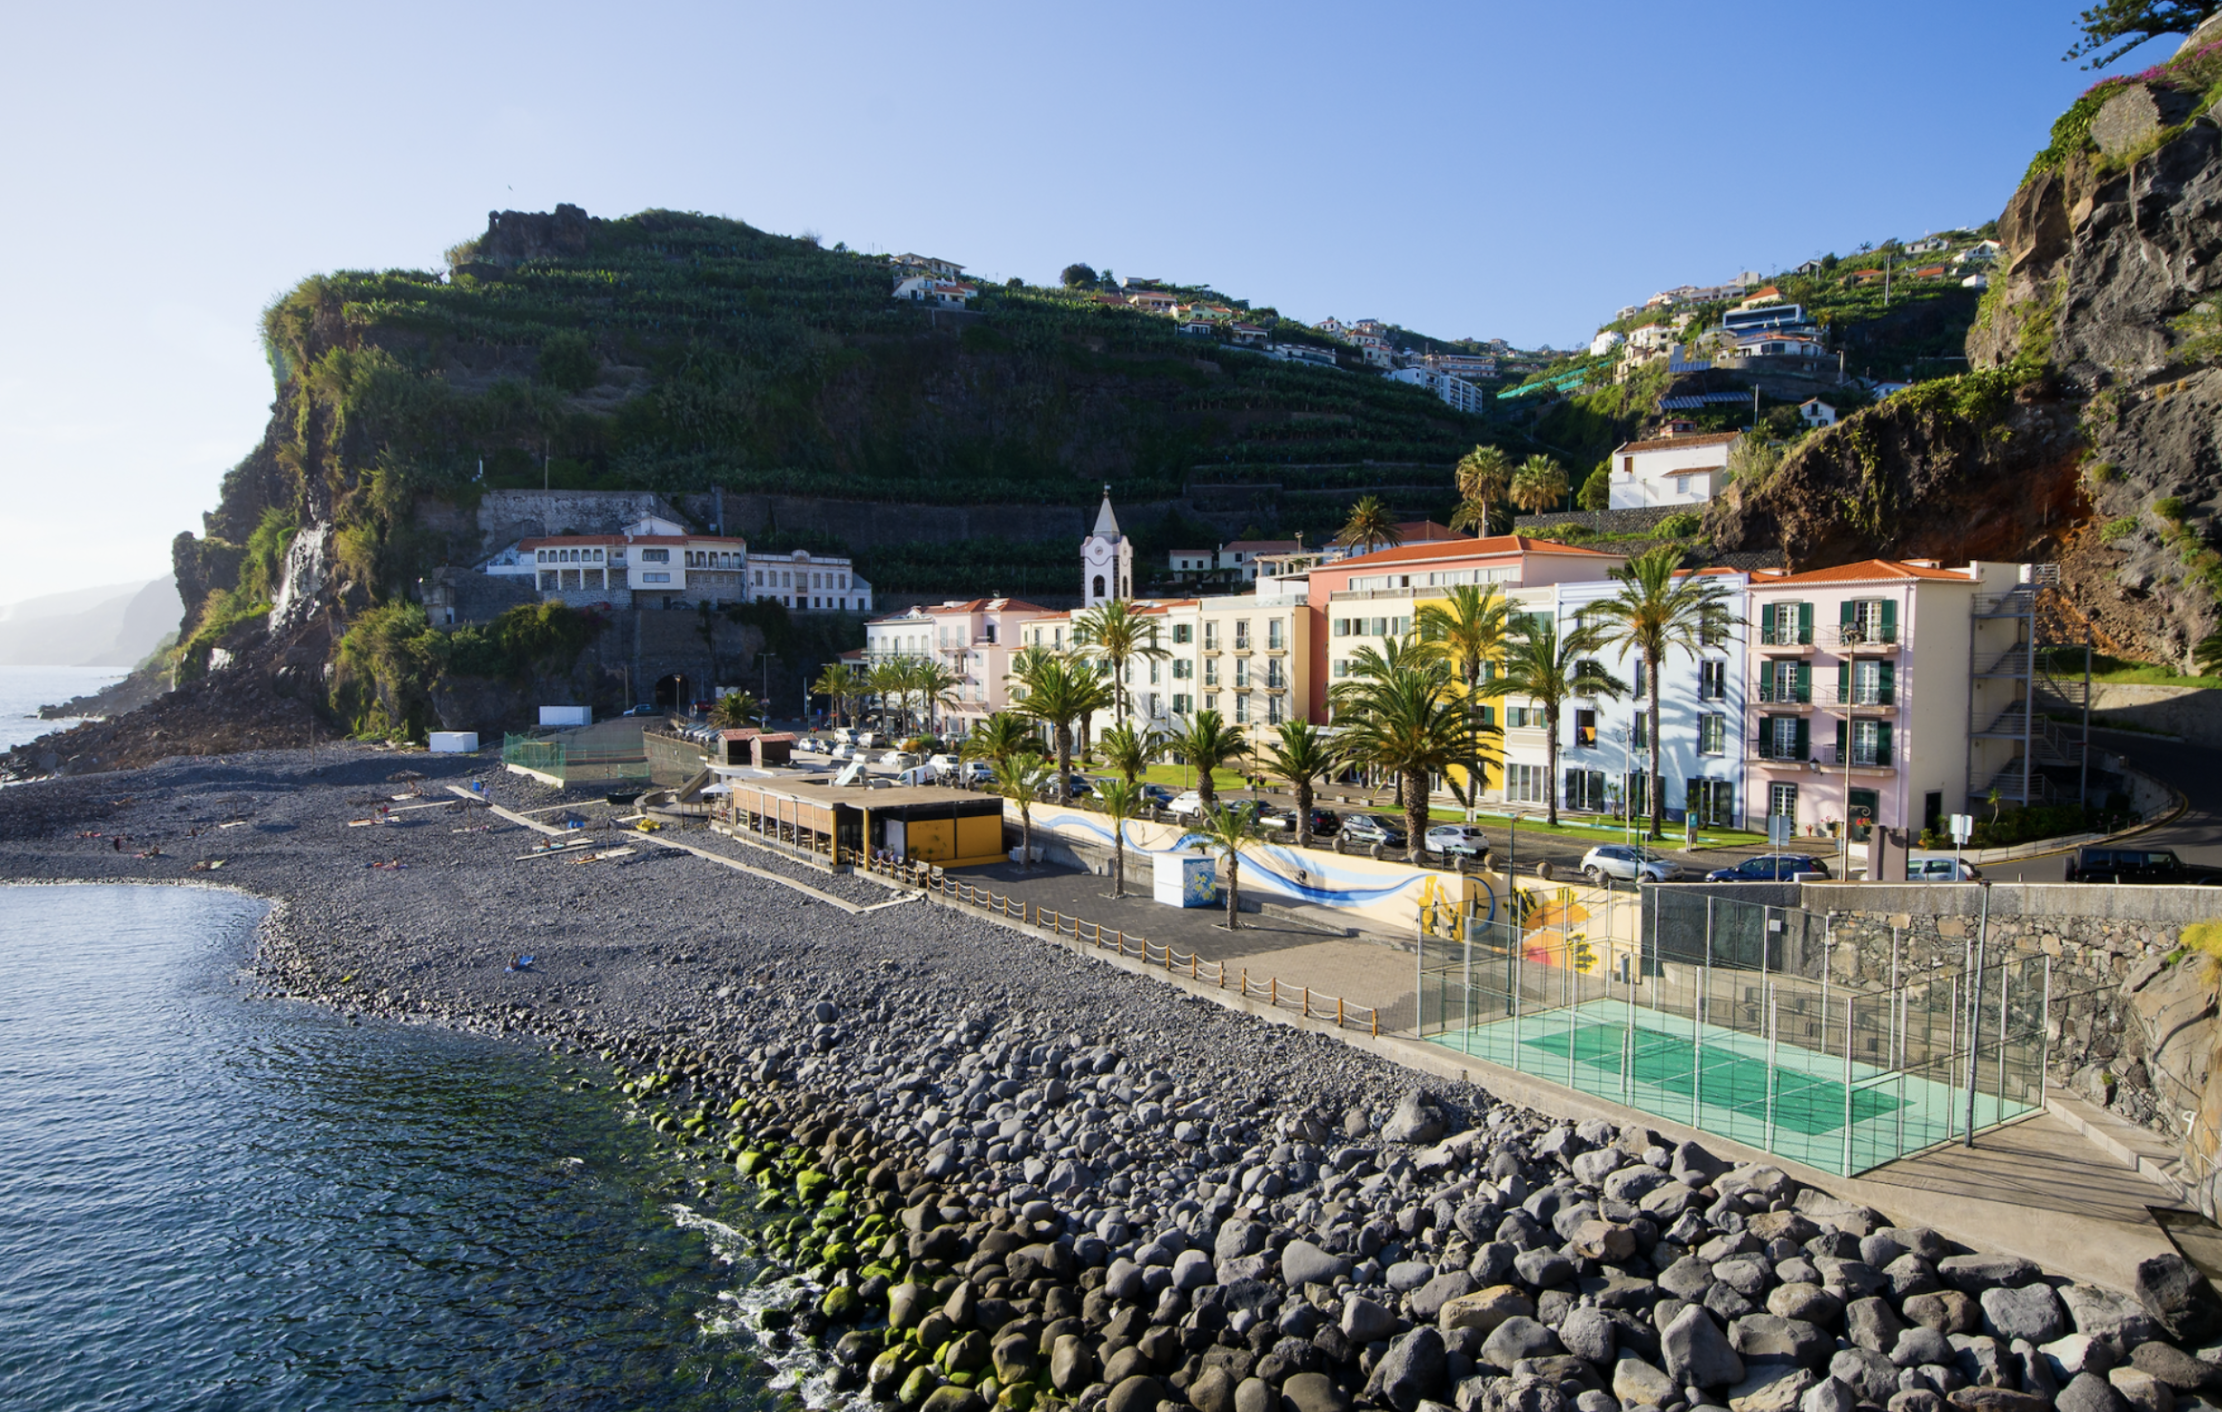 Colourful buildings line the seafront in Madeira, Portugal